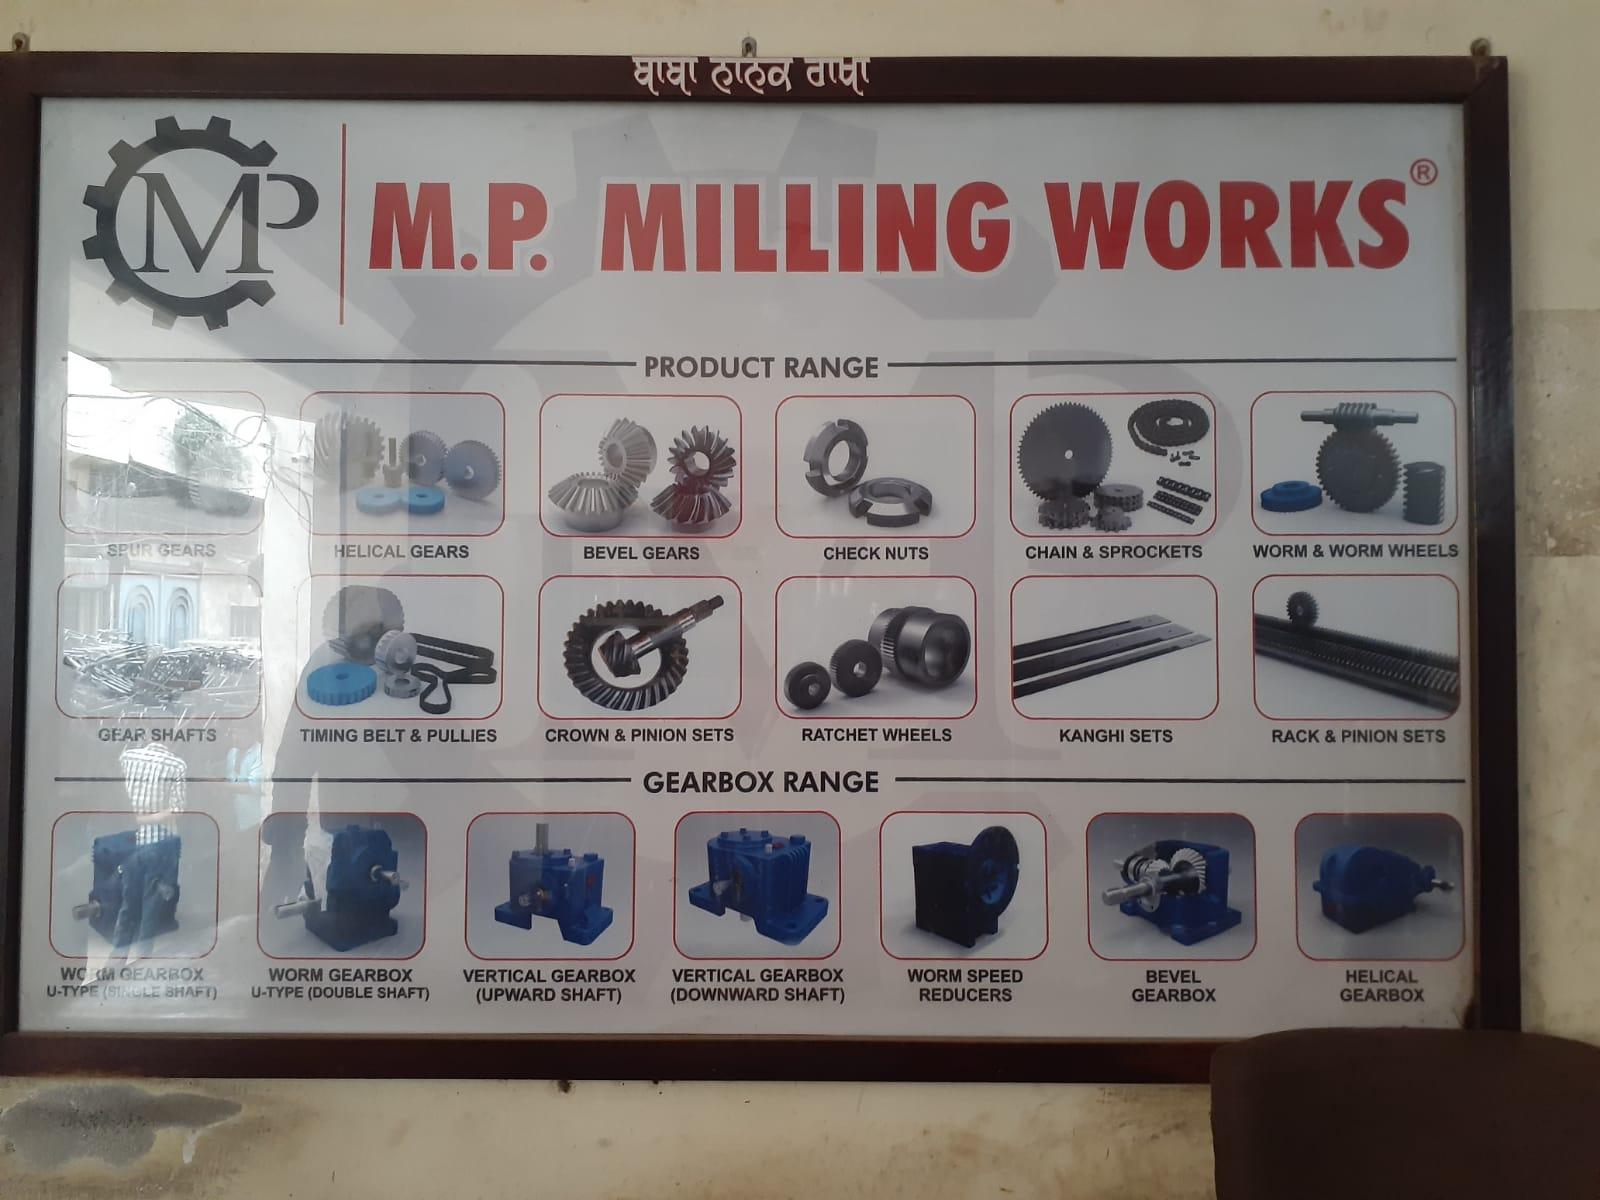 M.P. Milling Works